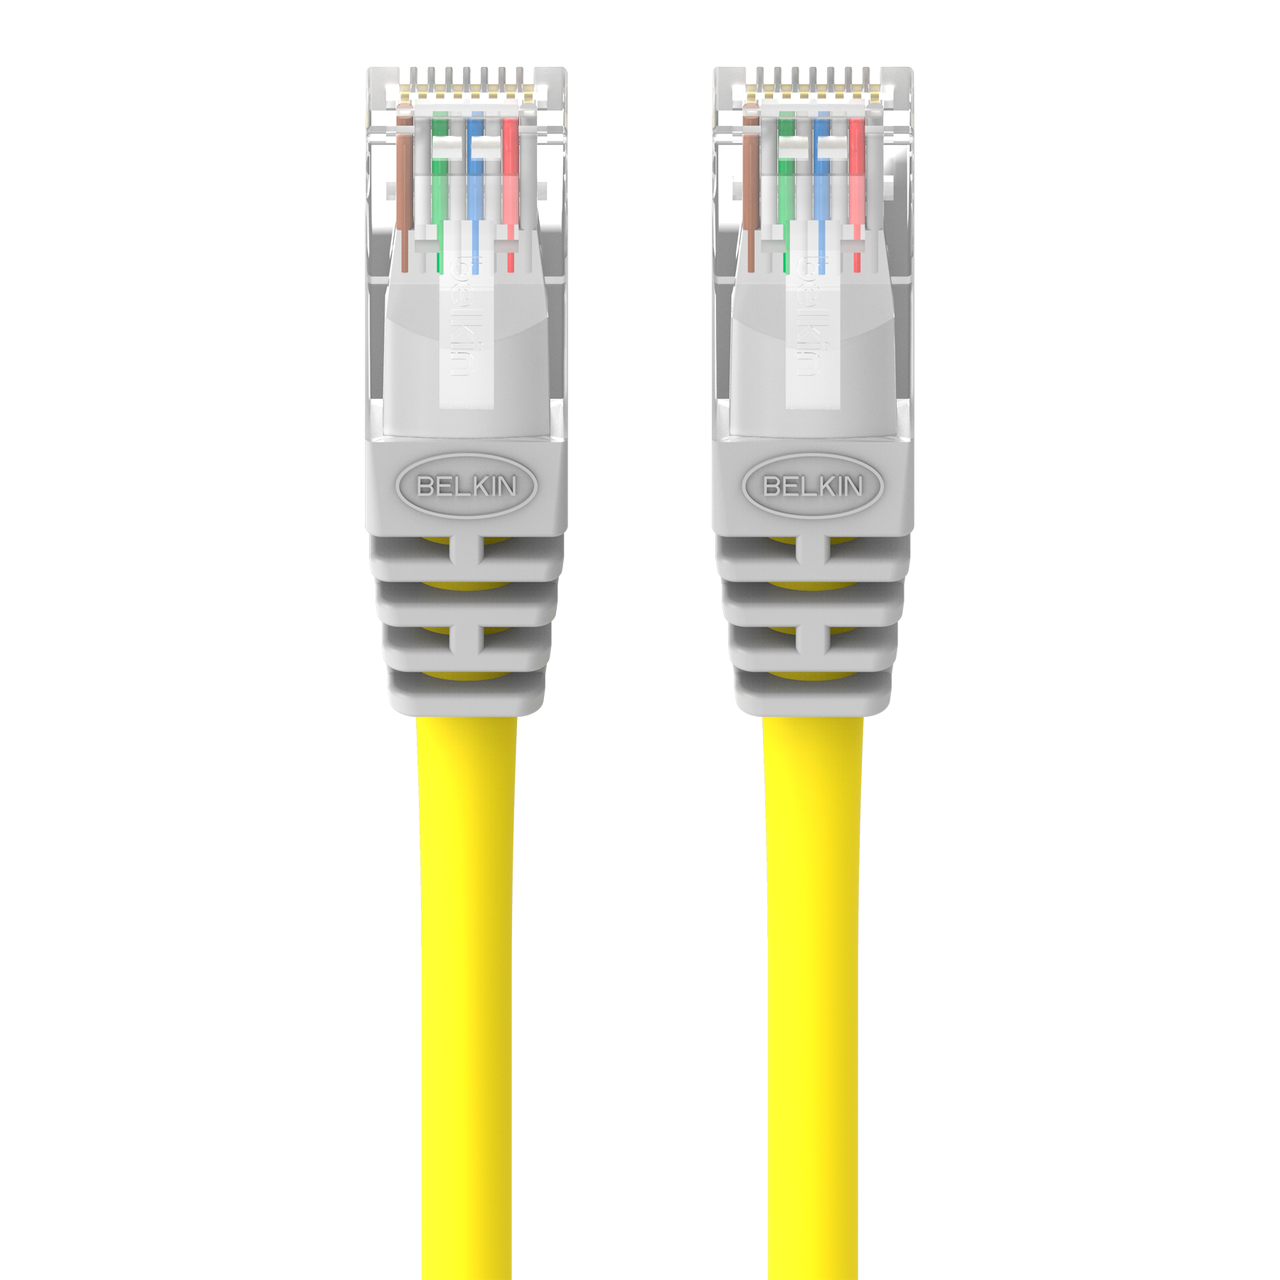 Belkin Cat5e Networking Cable 